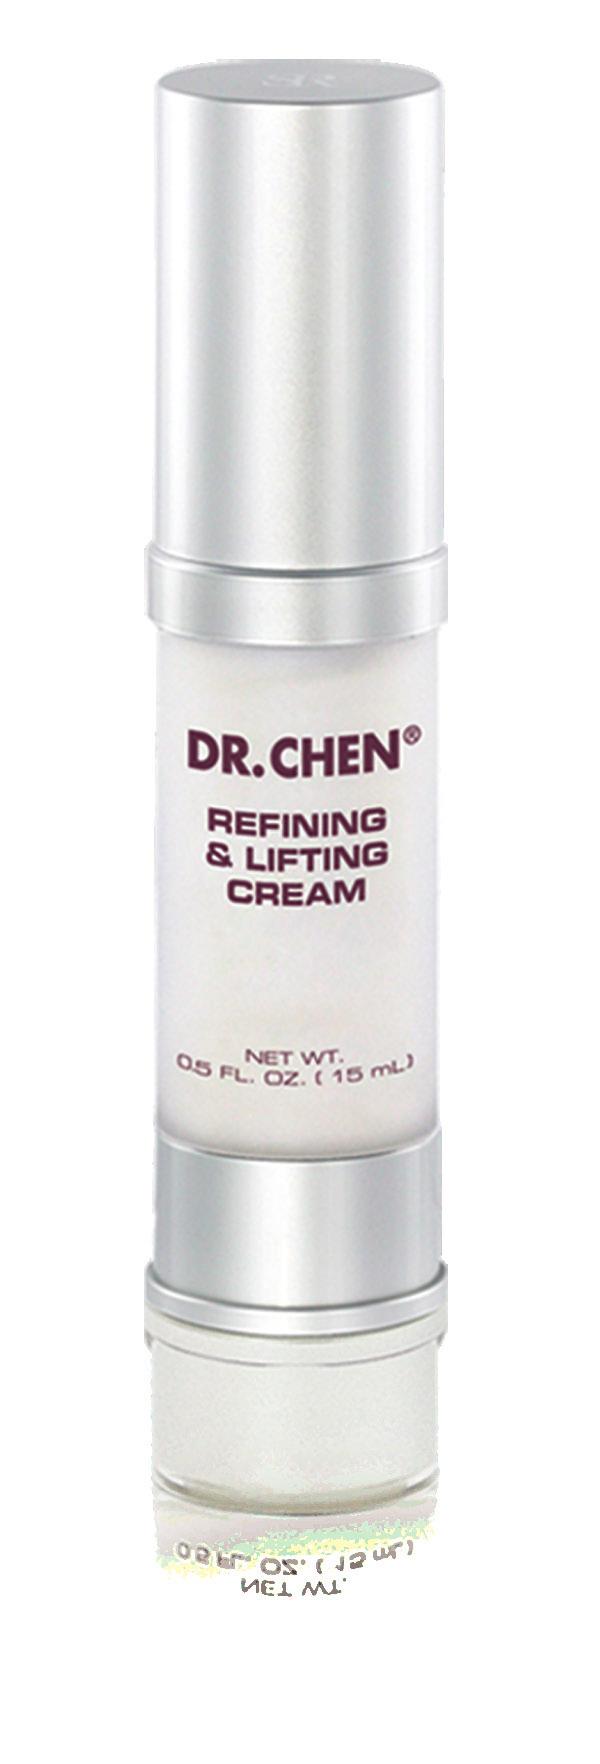 Dr. Chen Refining & Lifting Cream What is the primary function of Dr. Chen Refining & Lifting Cream? To restore and preserve the appearance of youthful skin. Dr. Chen Refining & Lifting Cream To be used after cleansing and toning.